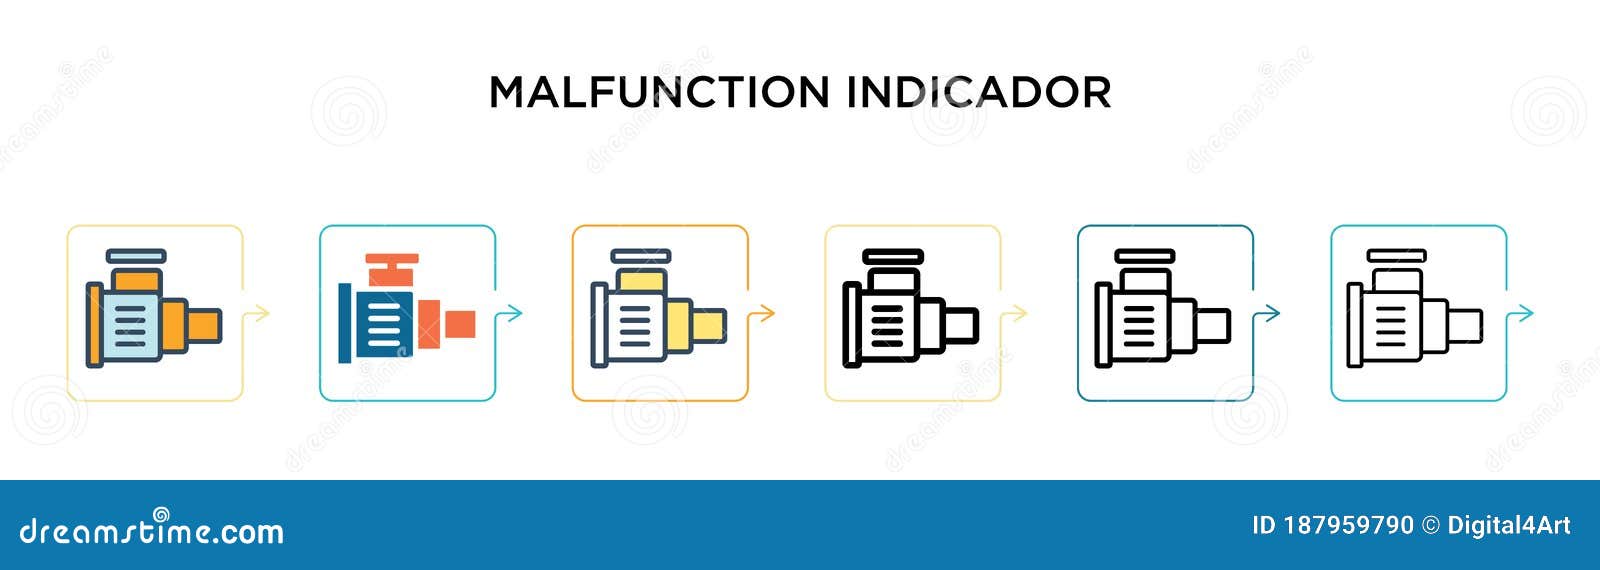 malfunction indicador  icon in 6 different modern styles. black, two colored malfunction indicador icons ed in filled